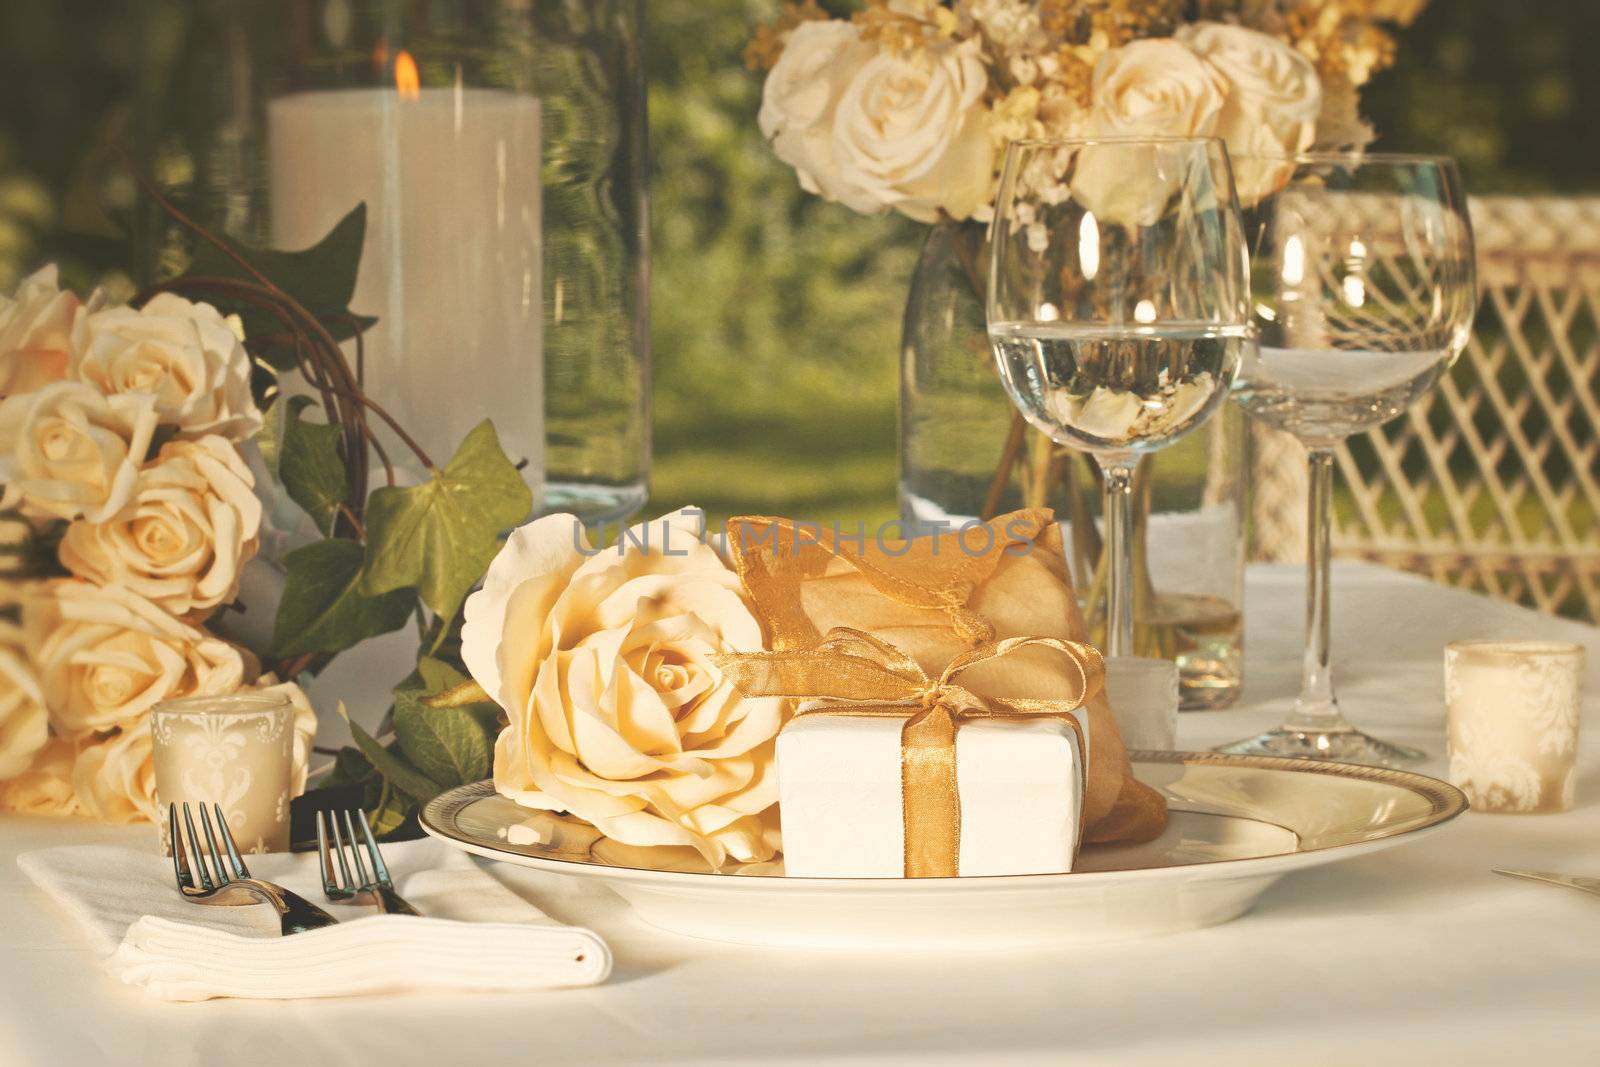 Gold wedding party favors on plate at reception